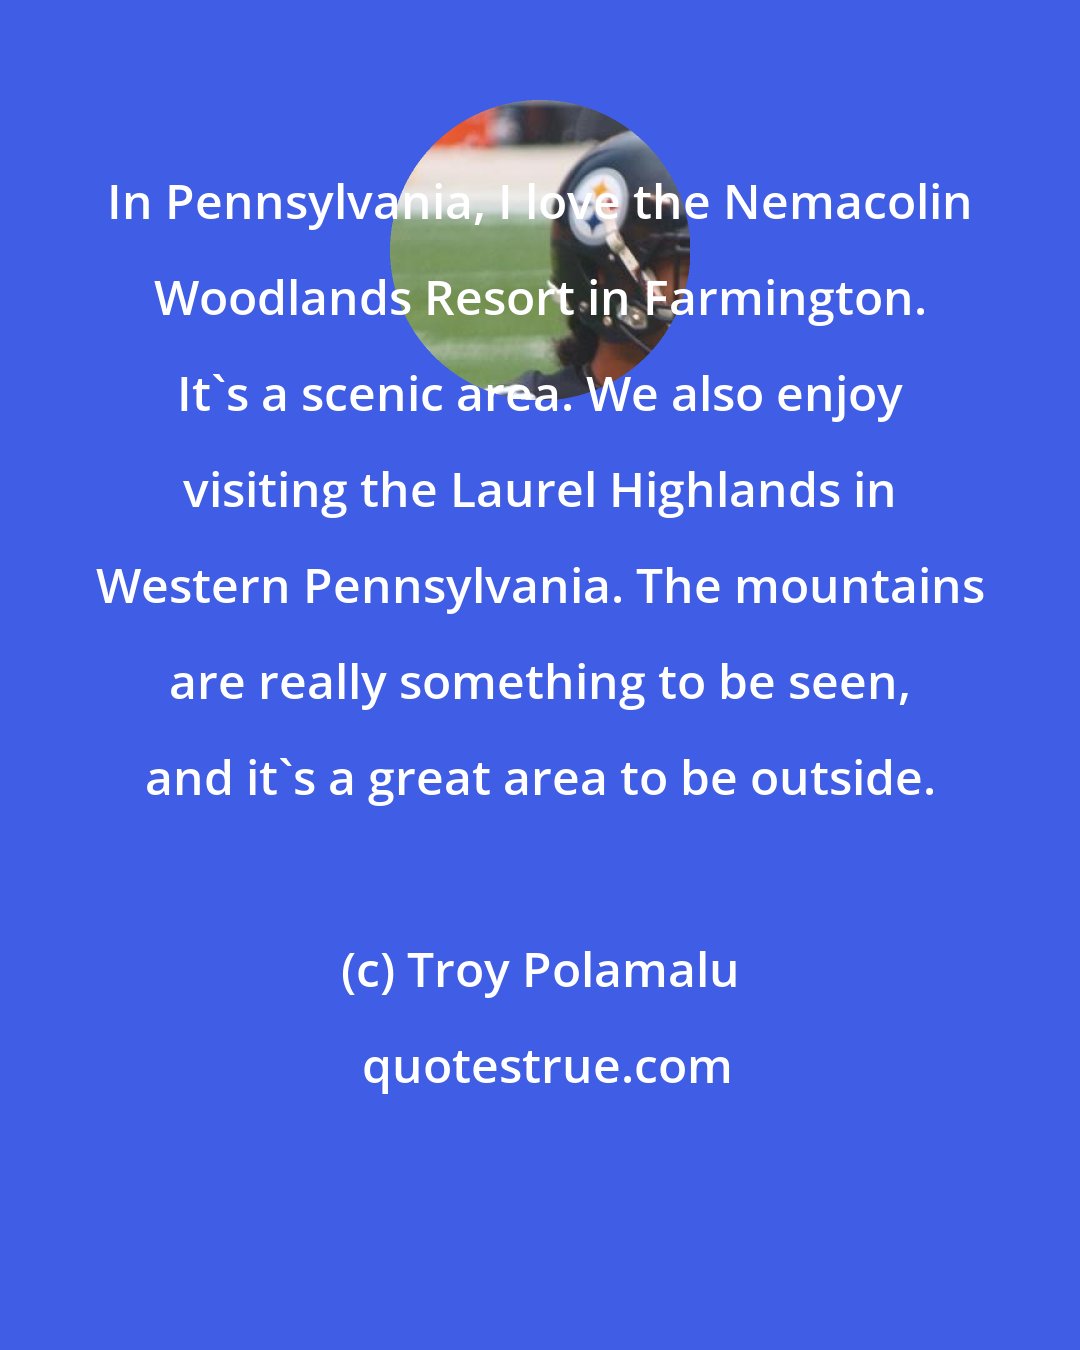 Troy Polamalu: In Pennsylvania, I love the Nemacolin Woodlands Resort in Farmington. It's a scenic area. We also enjoy visiting the Laurel Highlands in Western Pennsylvania. The mountains are really something to be seen, and it's a great area to be outside.